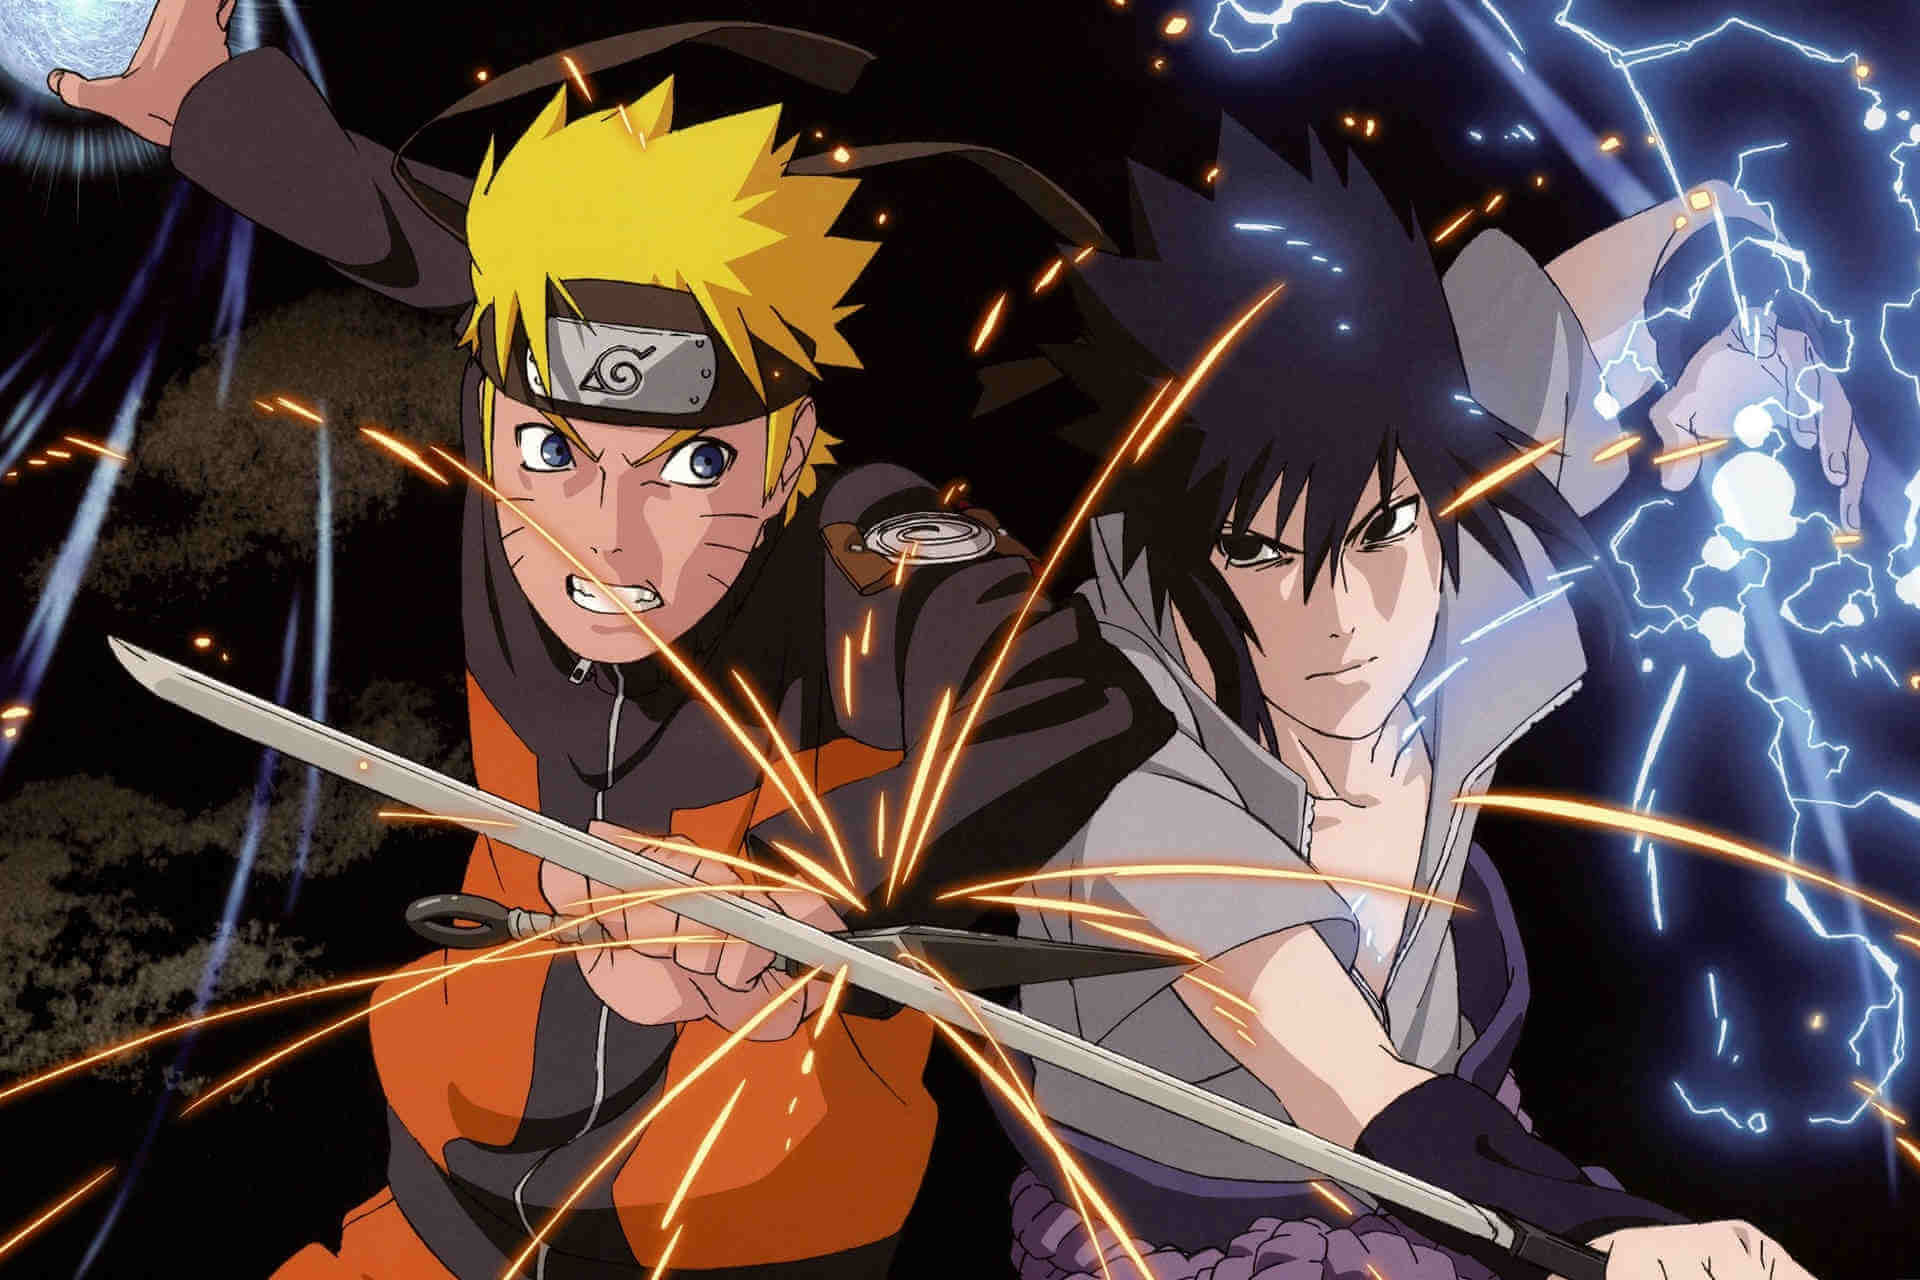 5 Best Naruto Online Games to Play in Your Browser [2023 List]